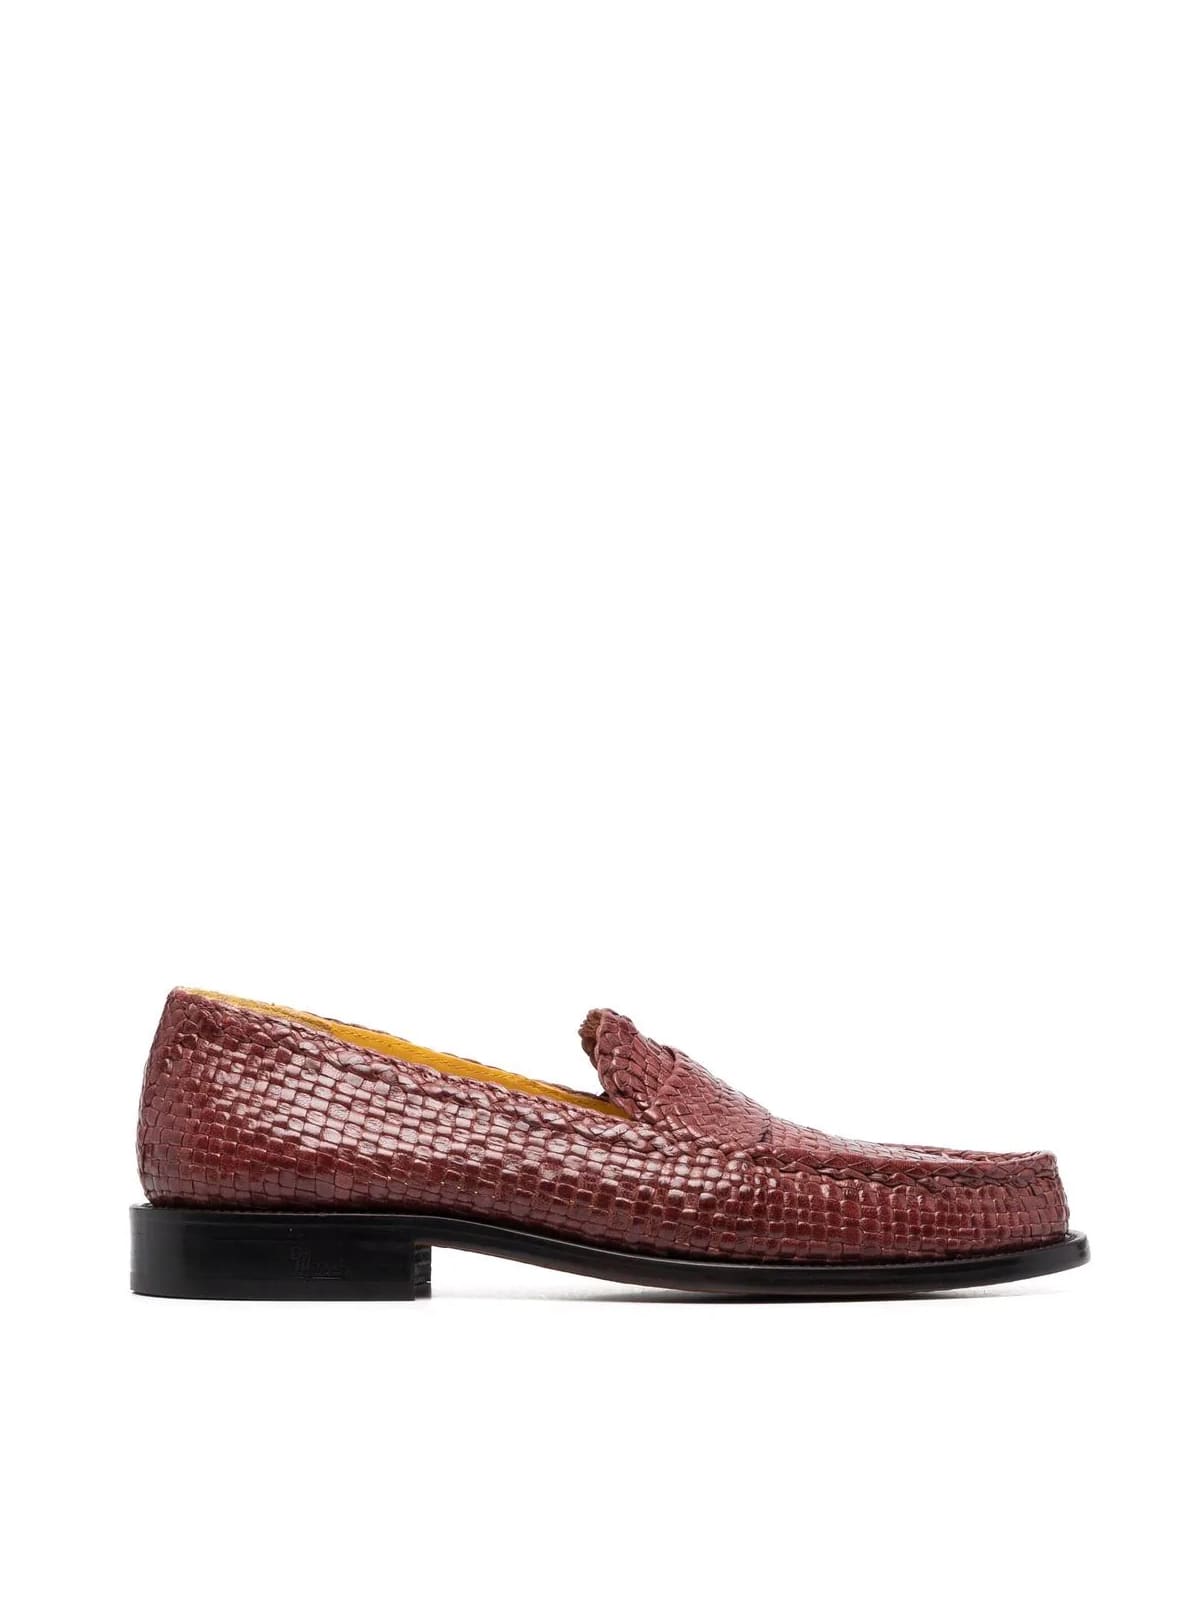 Marni Mocassin W/woven Leather Upper Lining And Insole In Leather In Contrasting Color